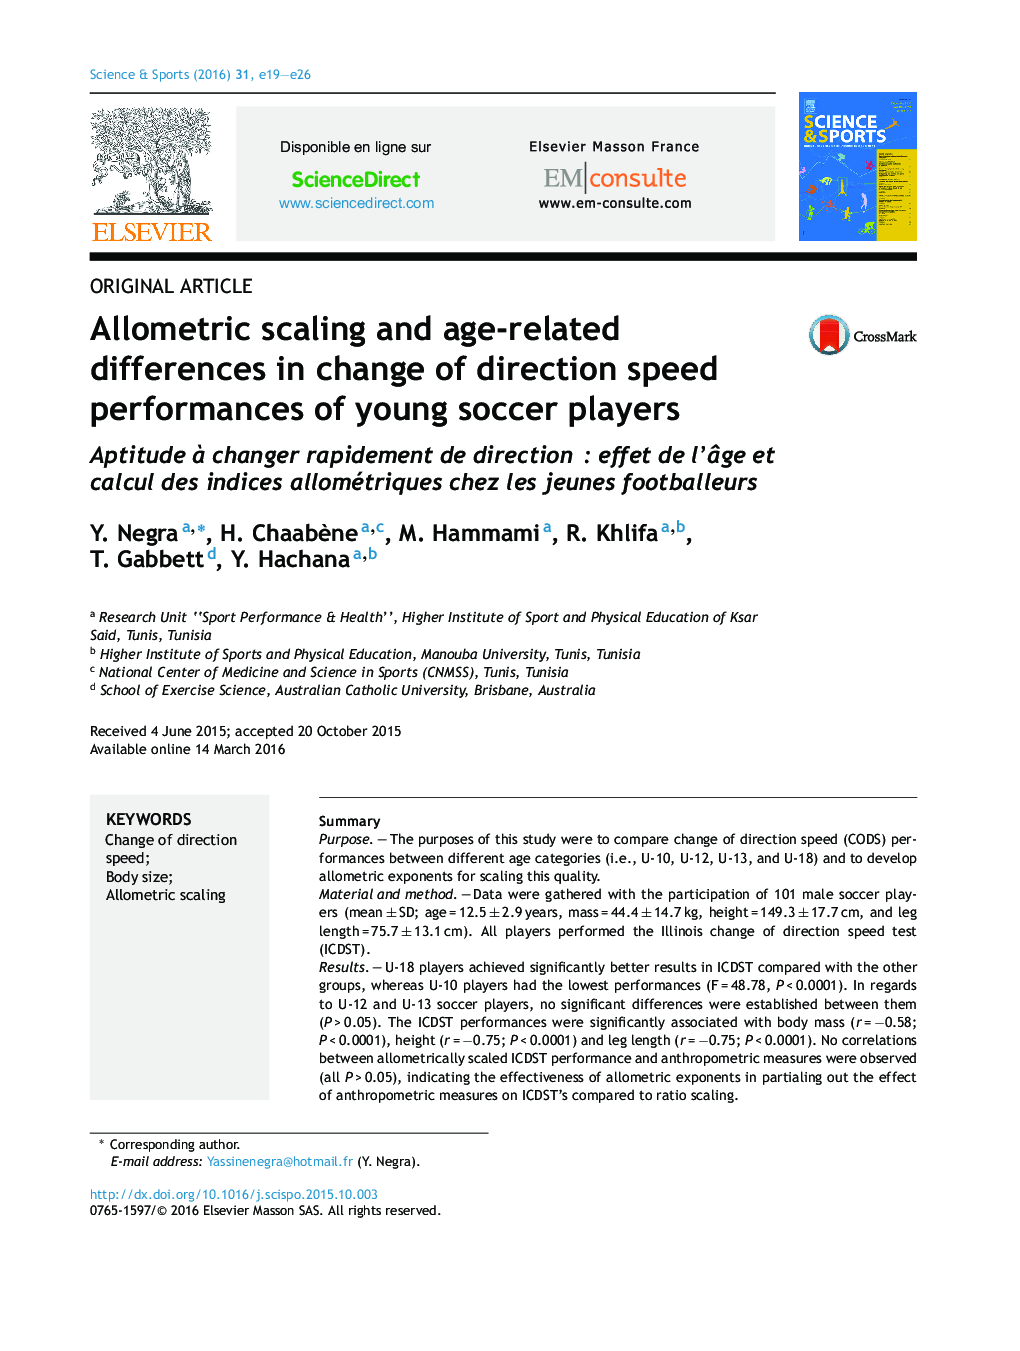 Allometric scaling and age-related differences in change of direction speed performances of young soccer players